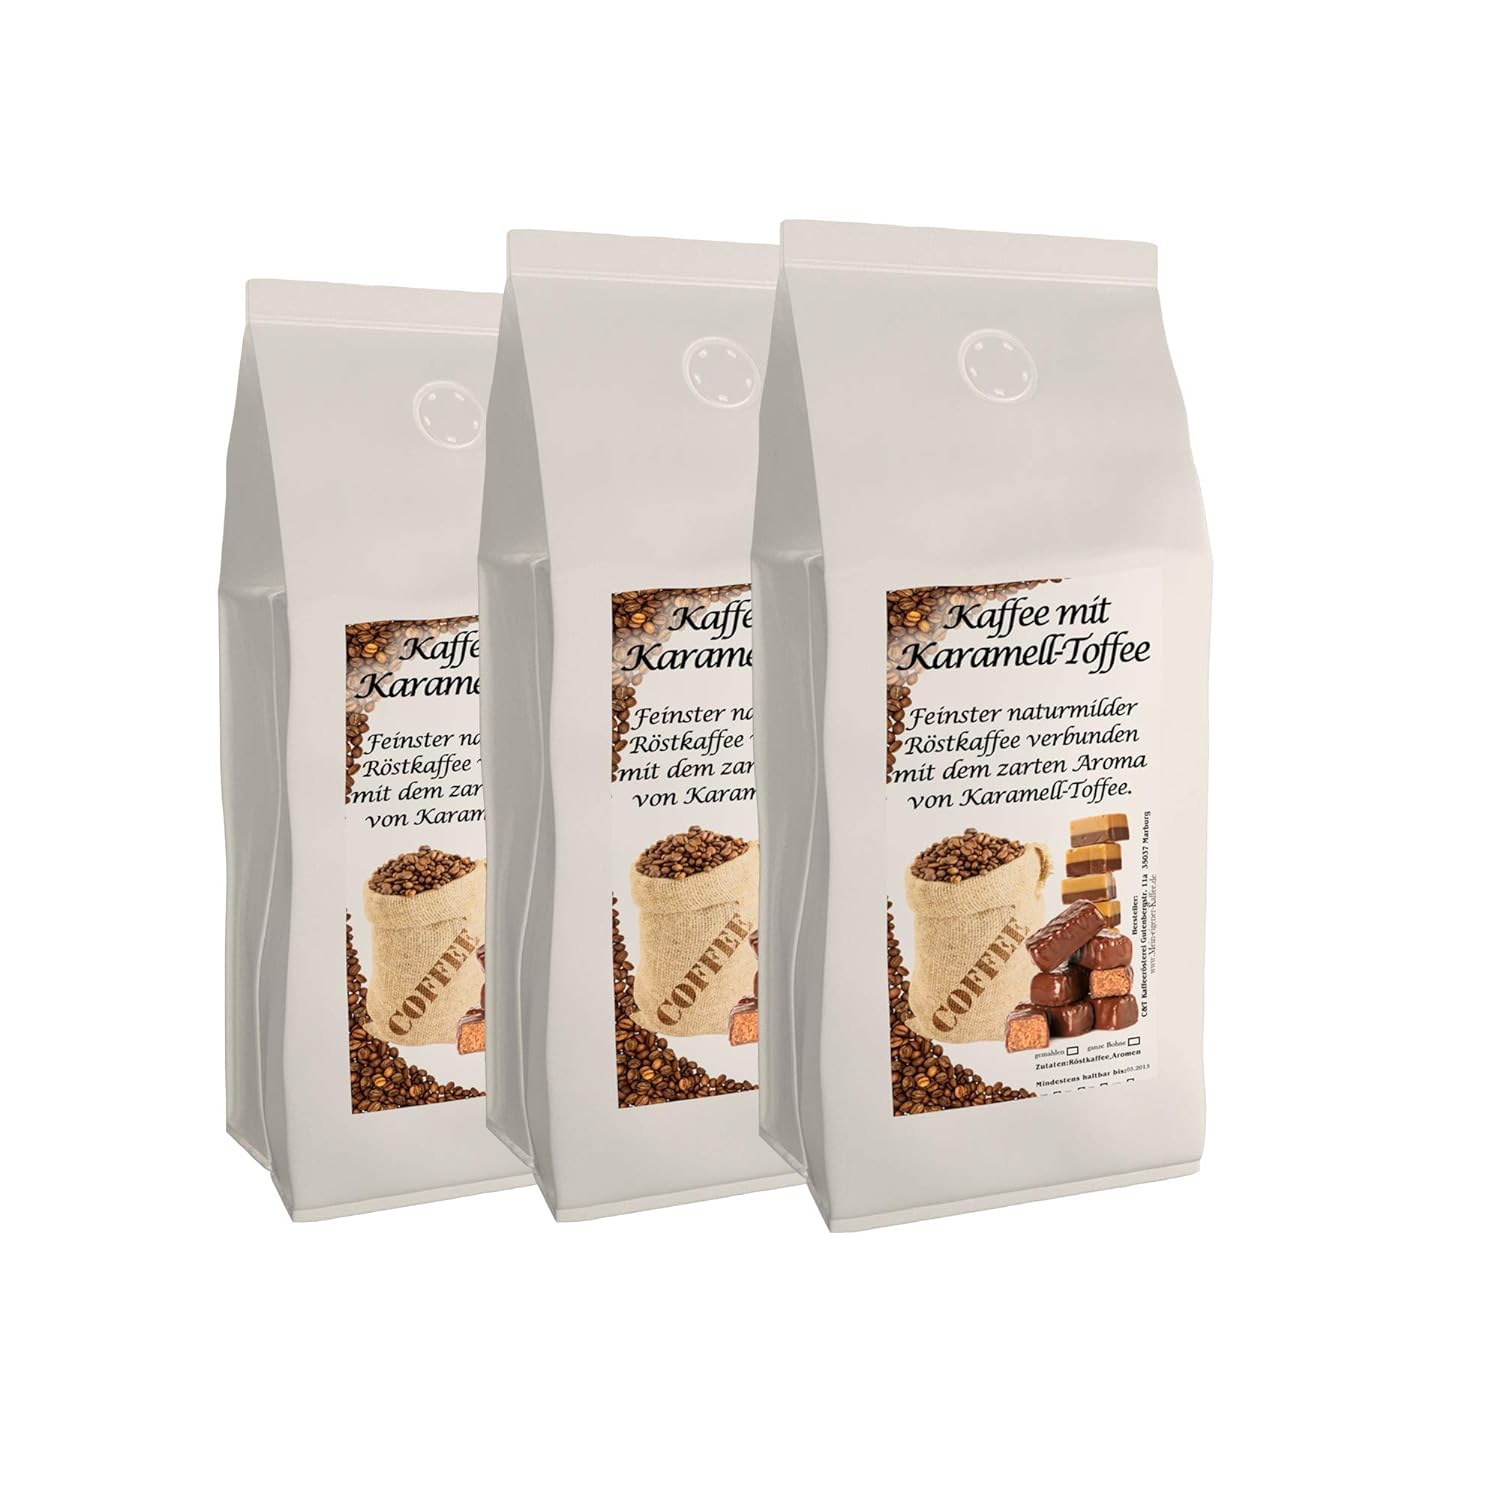 Aroma Coffee - Flavored Coffee - Caramel - Top Coffee - Economy Pack - Gentle + Freshly Roasted (Caramel Toffee, 3000 g, Ground)